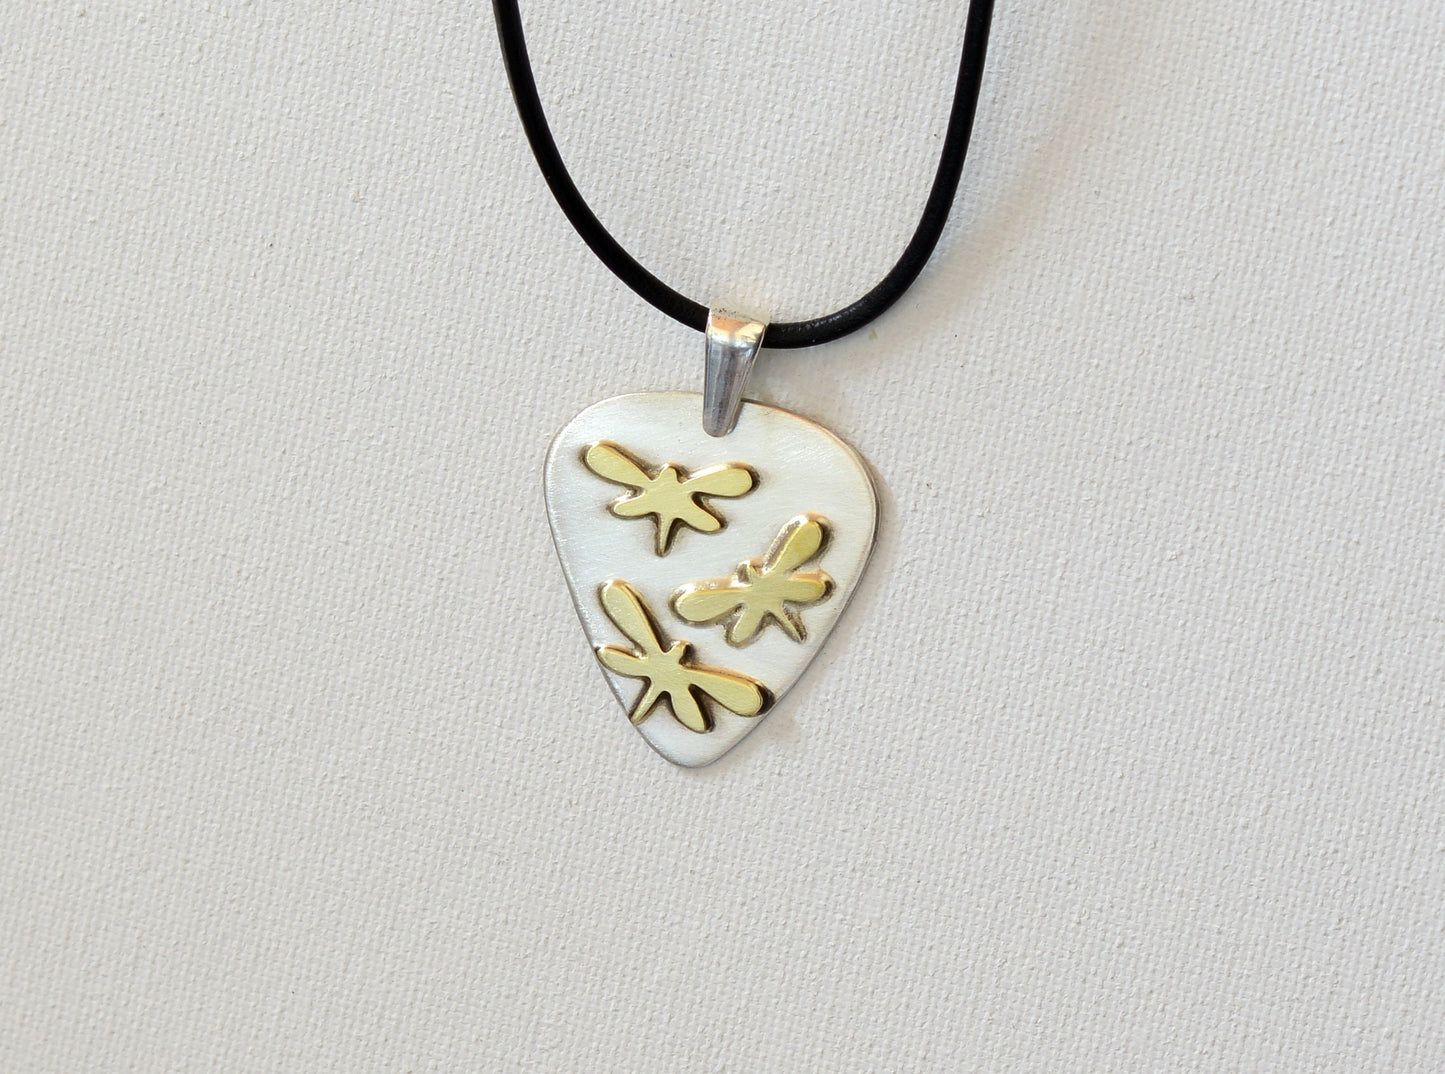 Dragonfly on Guitar Pick Necklace in Sterling Silver